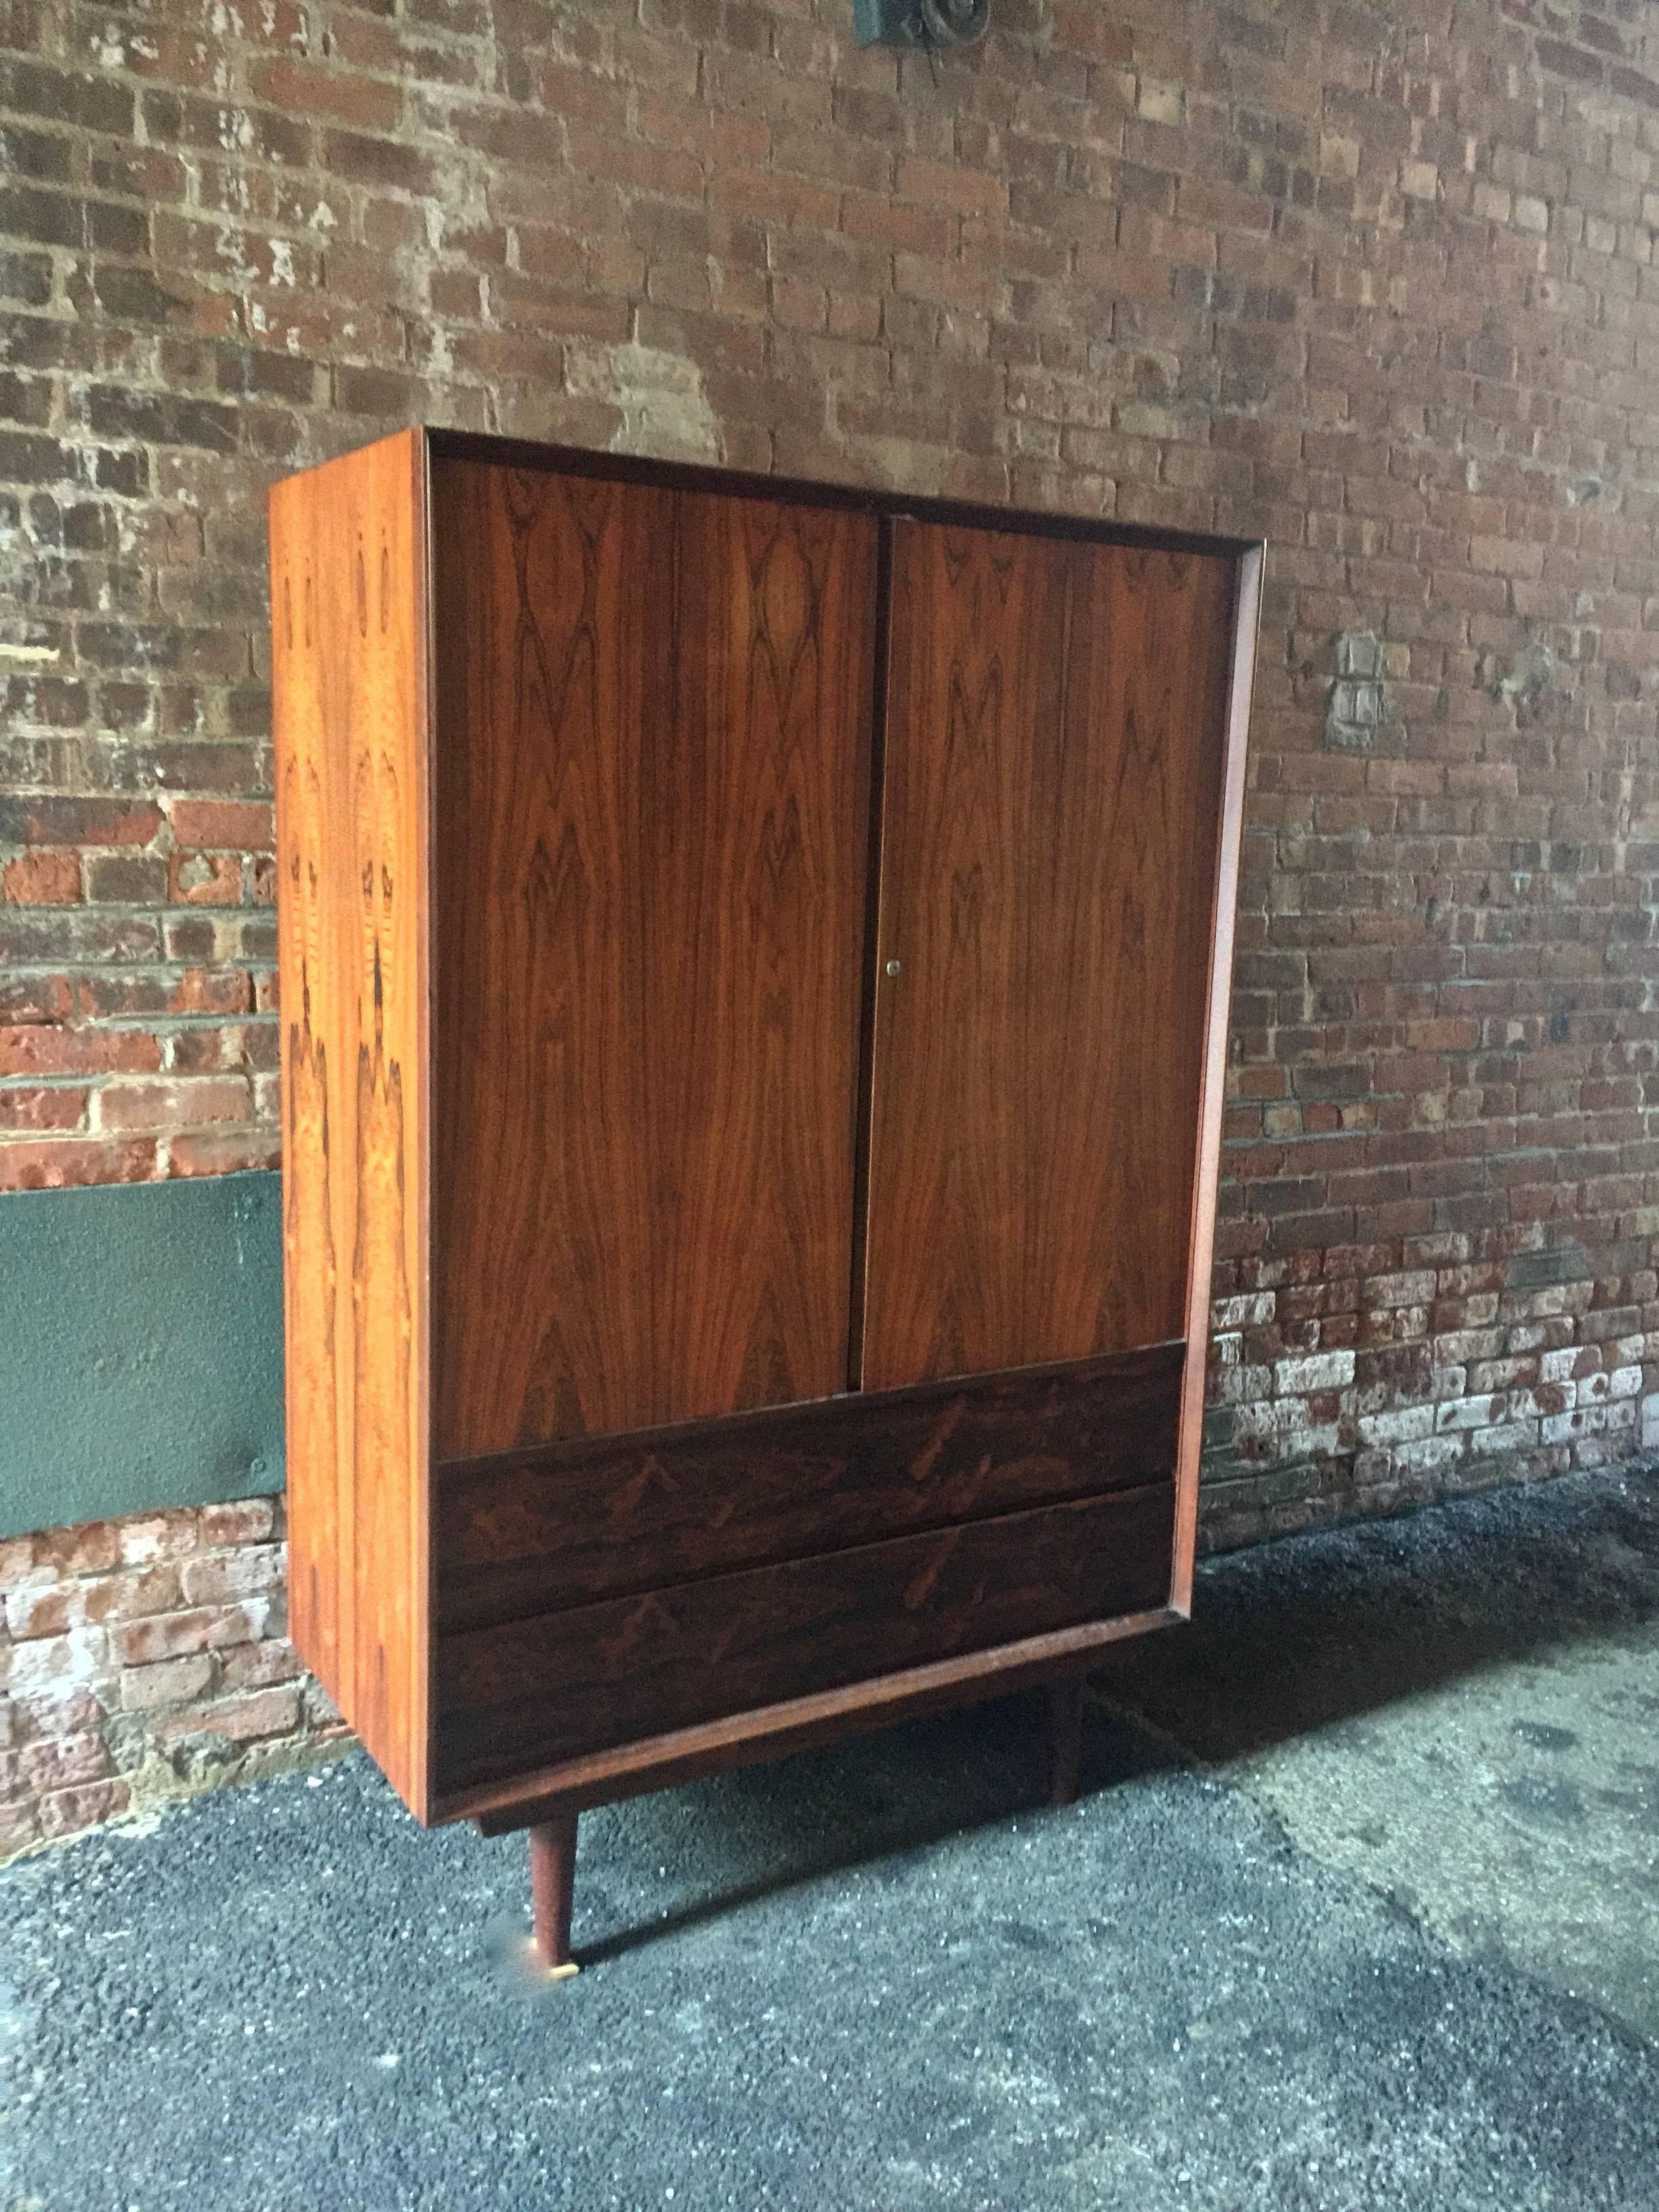 Tall Danish modern rosewood cabinet. Two long drawers on the bottom with three hidden drawers with four large interior cubby holes, circa 1960-1970. 

Please, take the time to view the other rosewood pieces from this spectacular bedroom